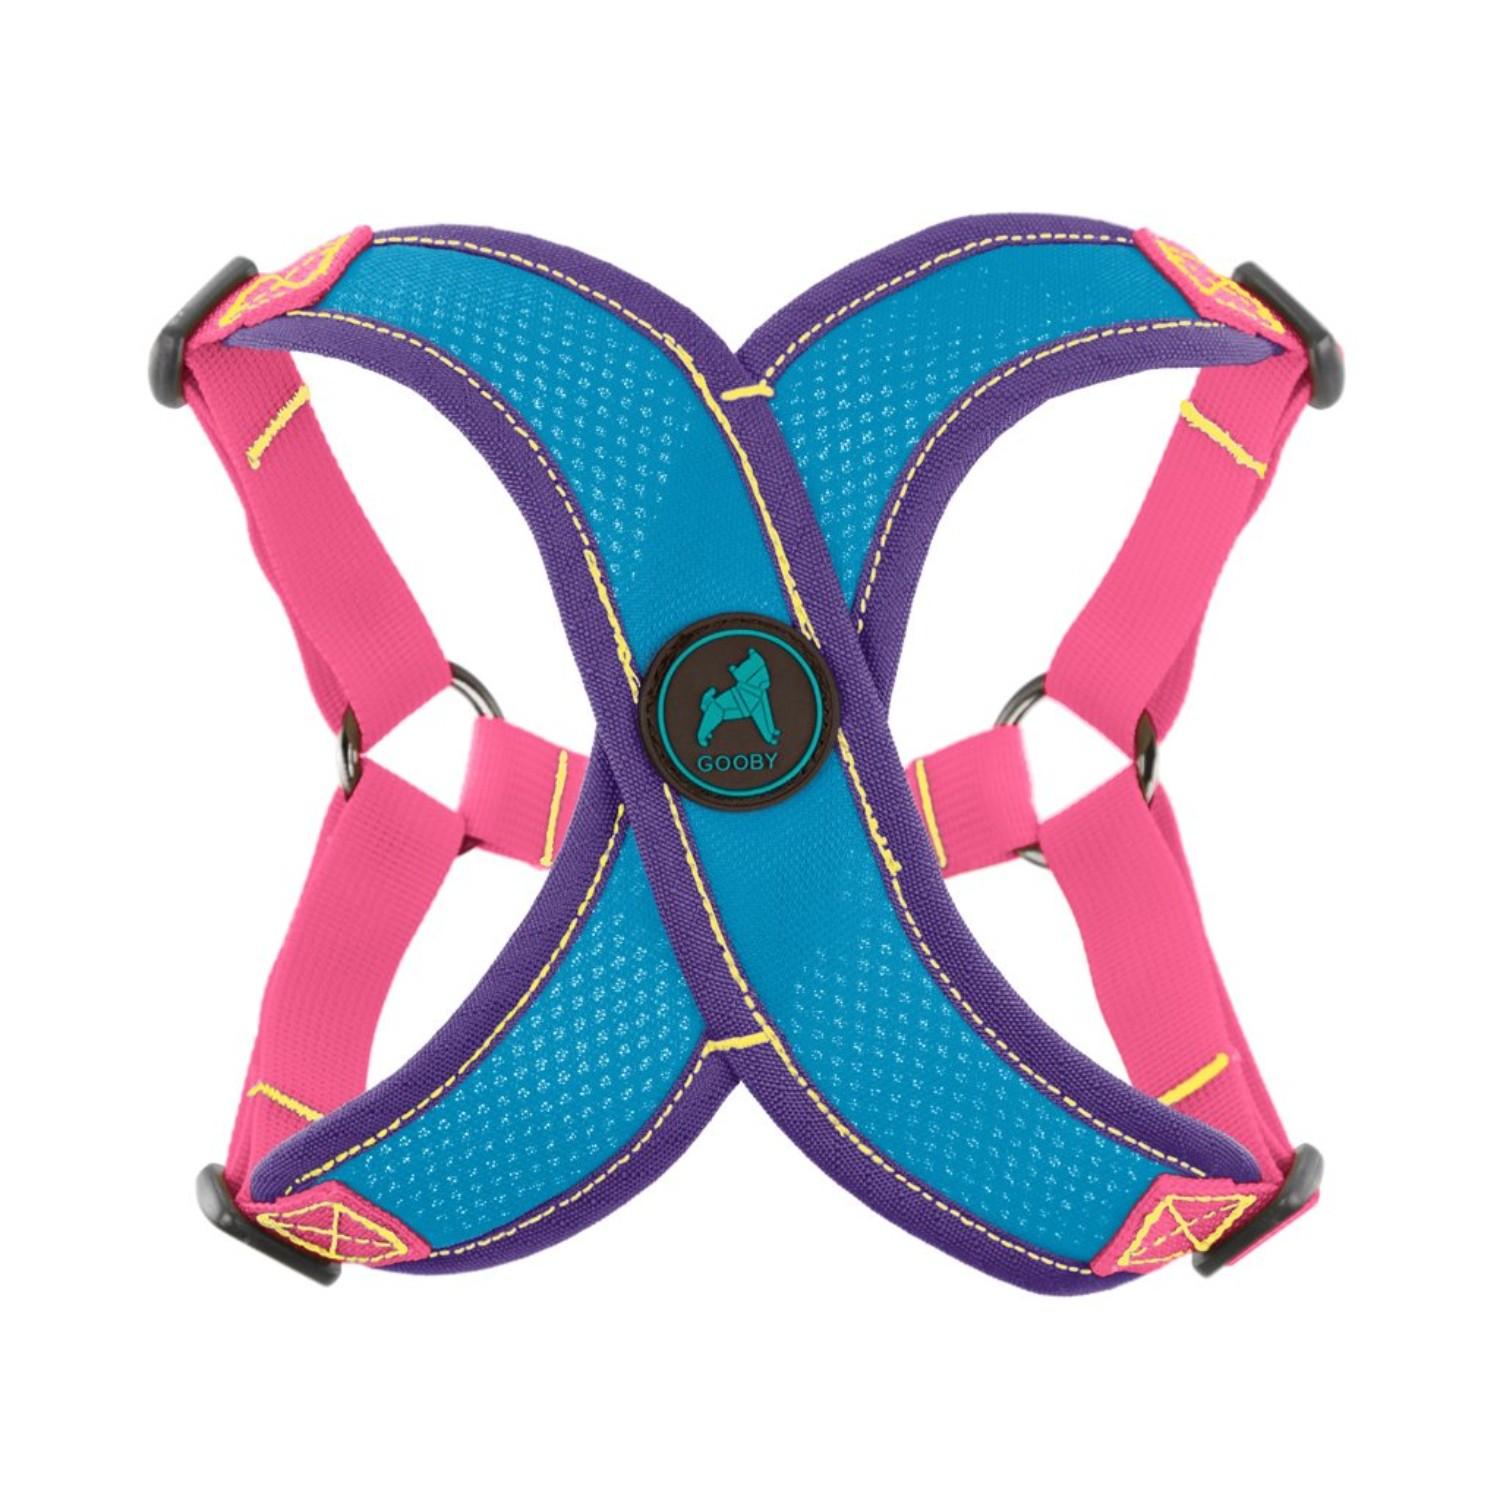 Gooby Comfort X V2 Step-In Dog Harness - Turquoise & Pink Trim